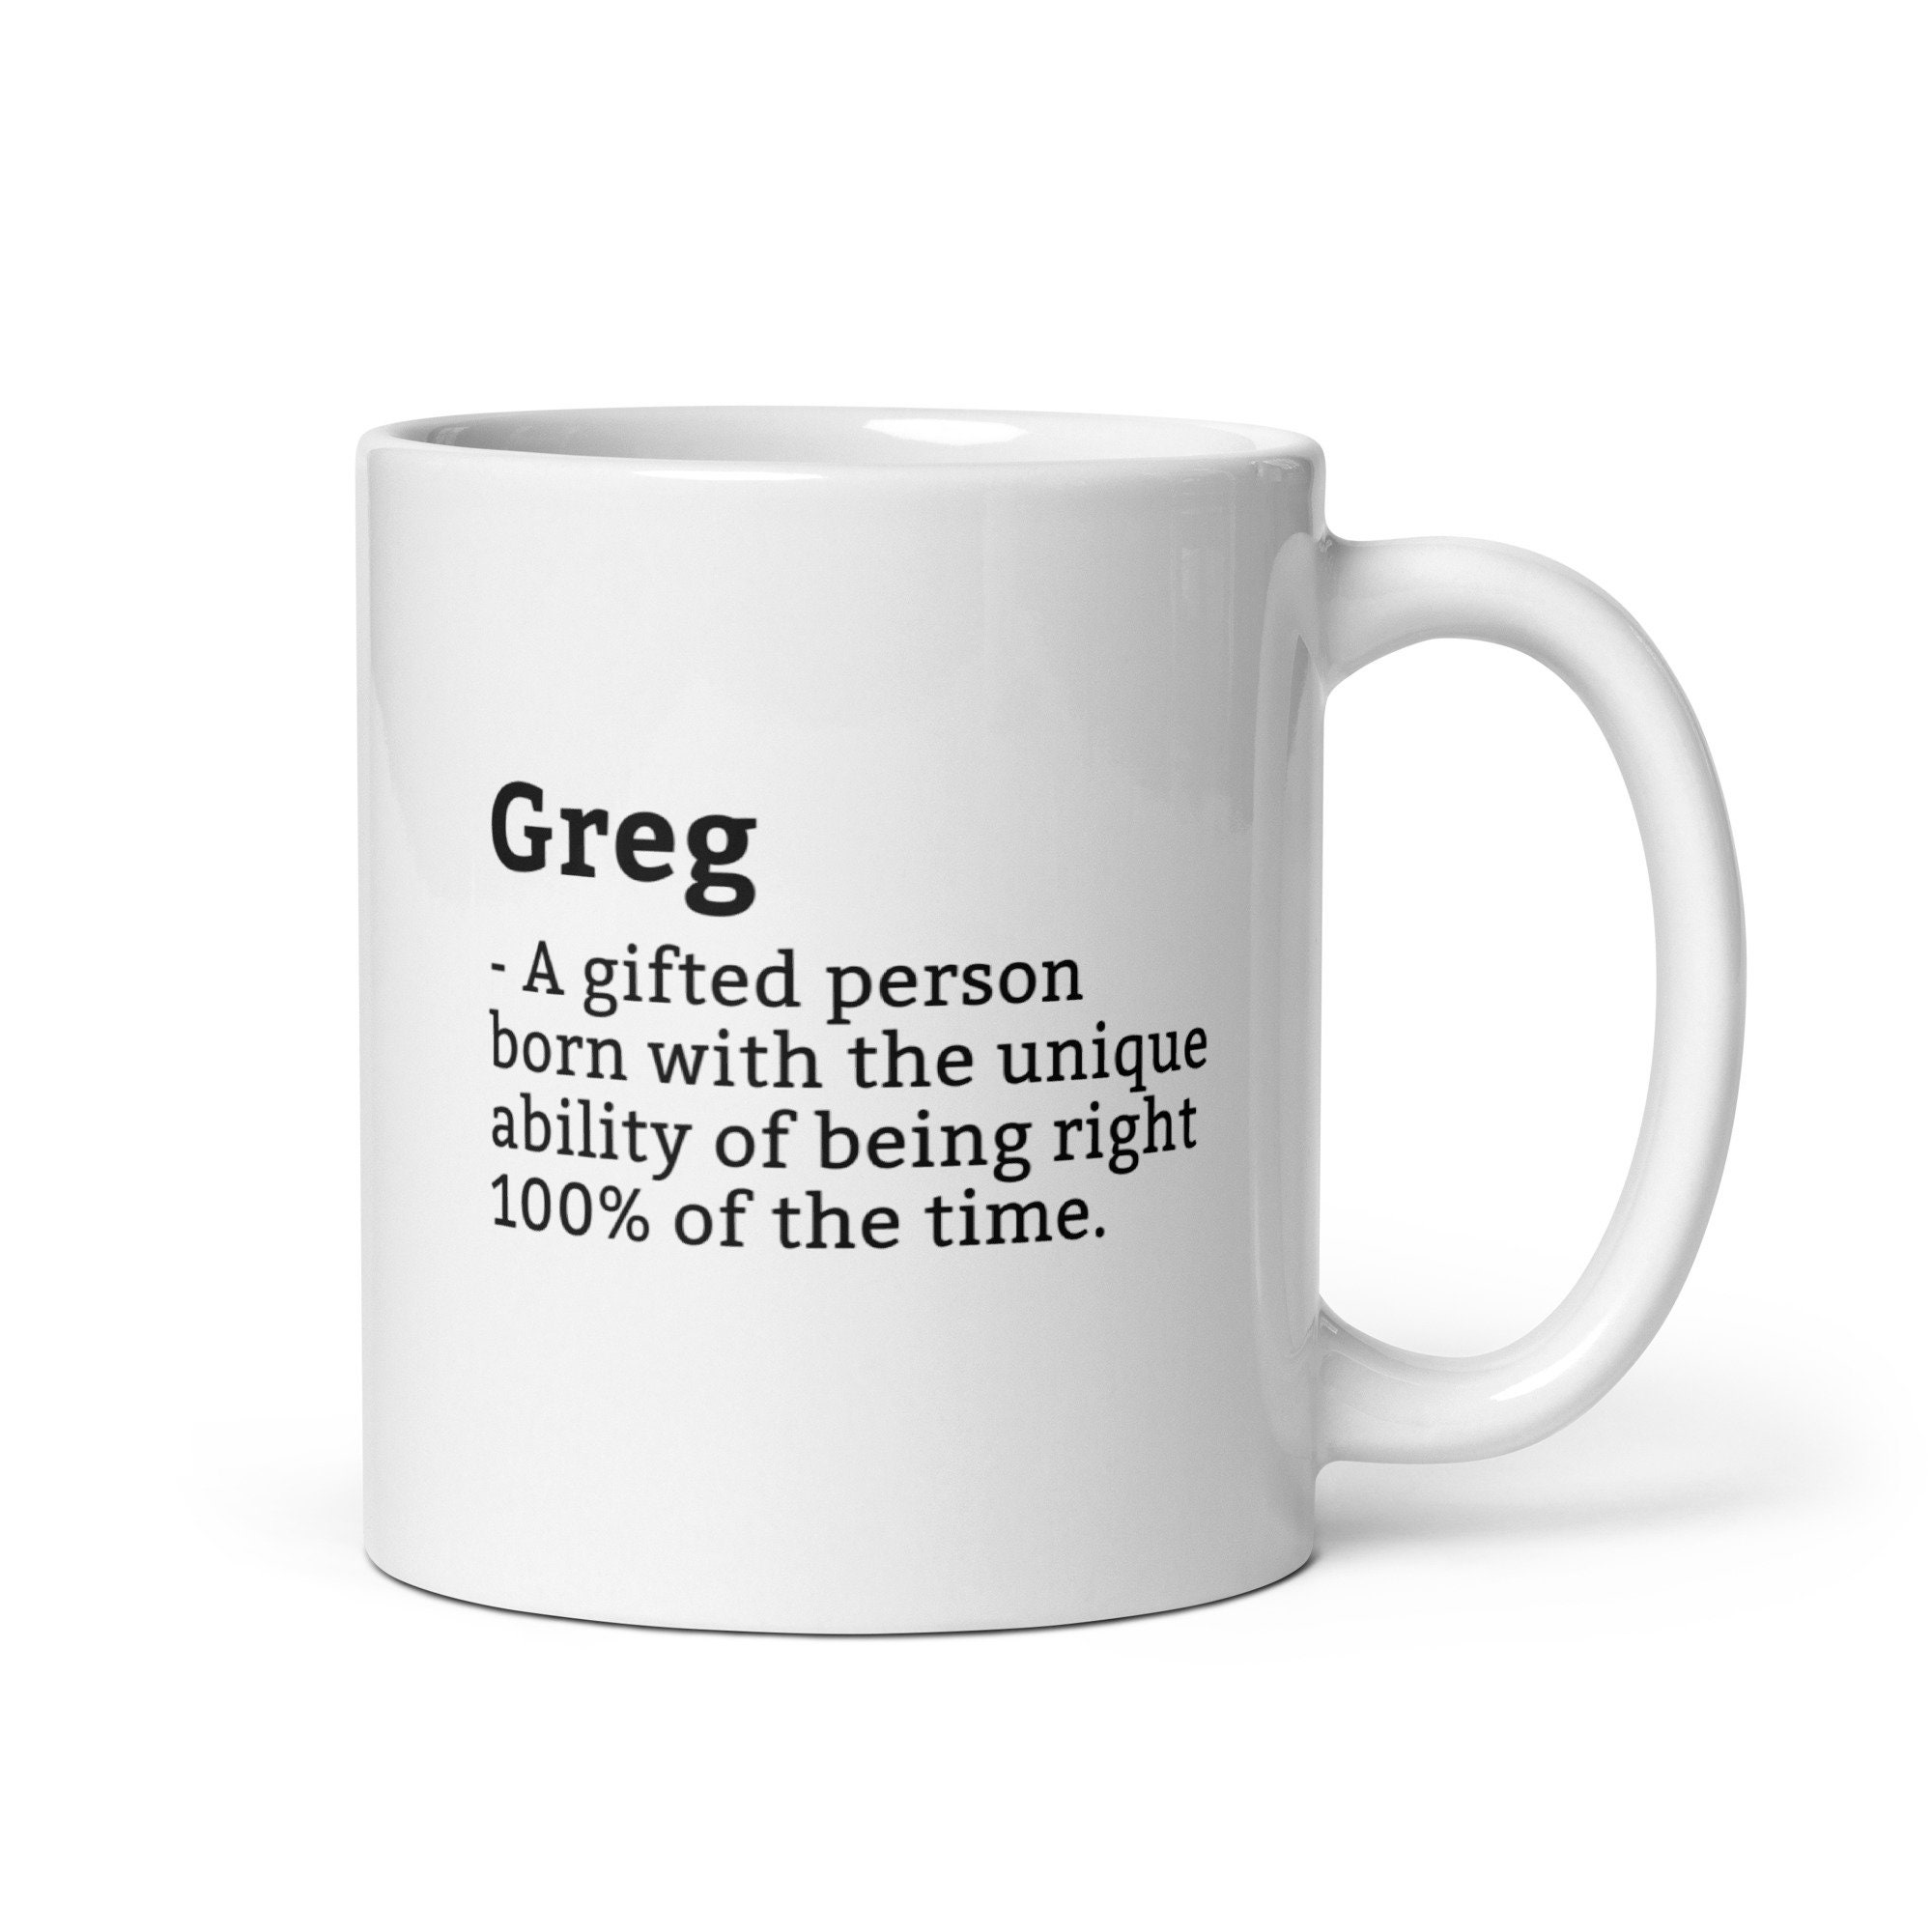  Funny Coffee Mug ,With people of limited ability